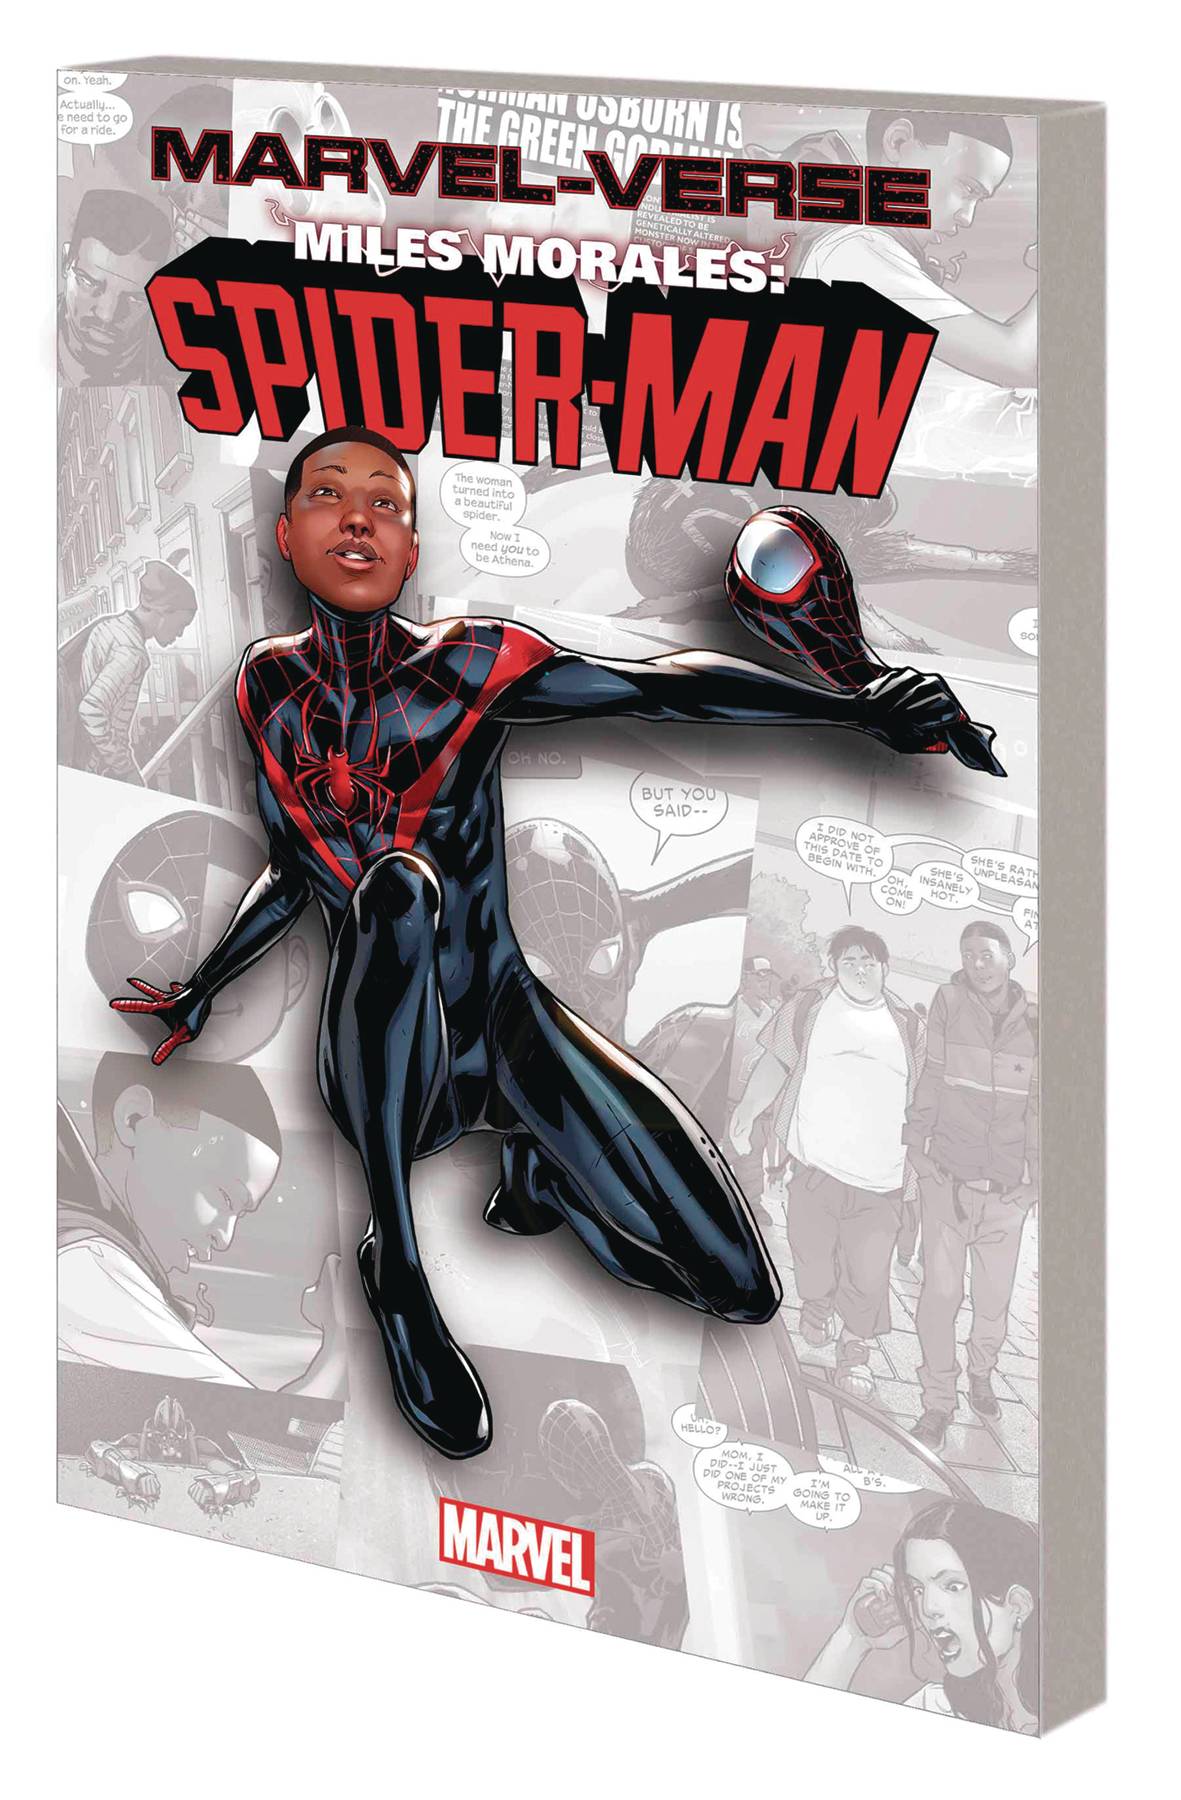 MILES MORALES SPIDER-MAN #13 PICTURE